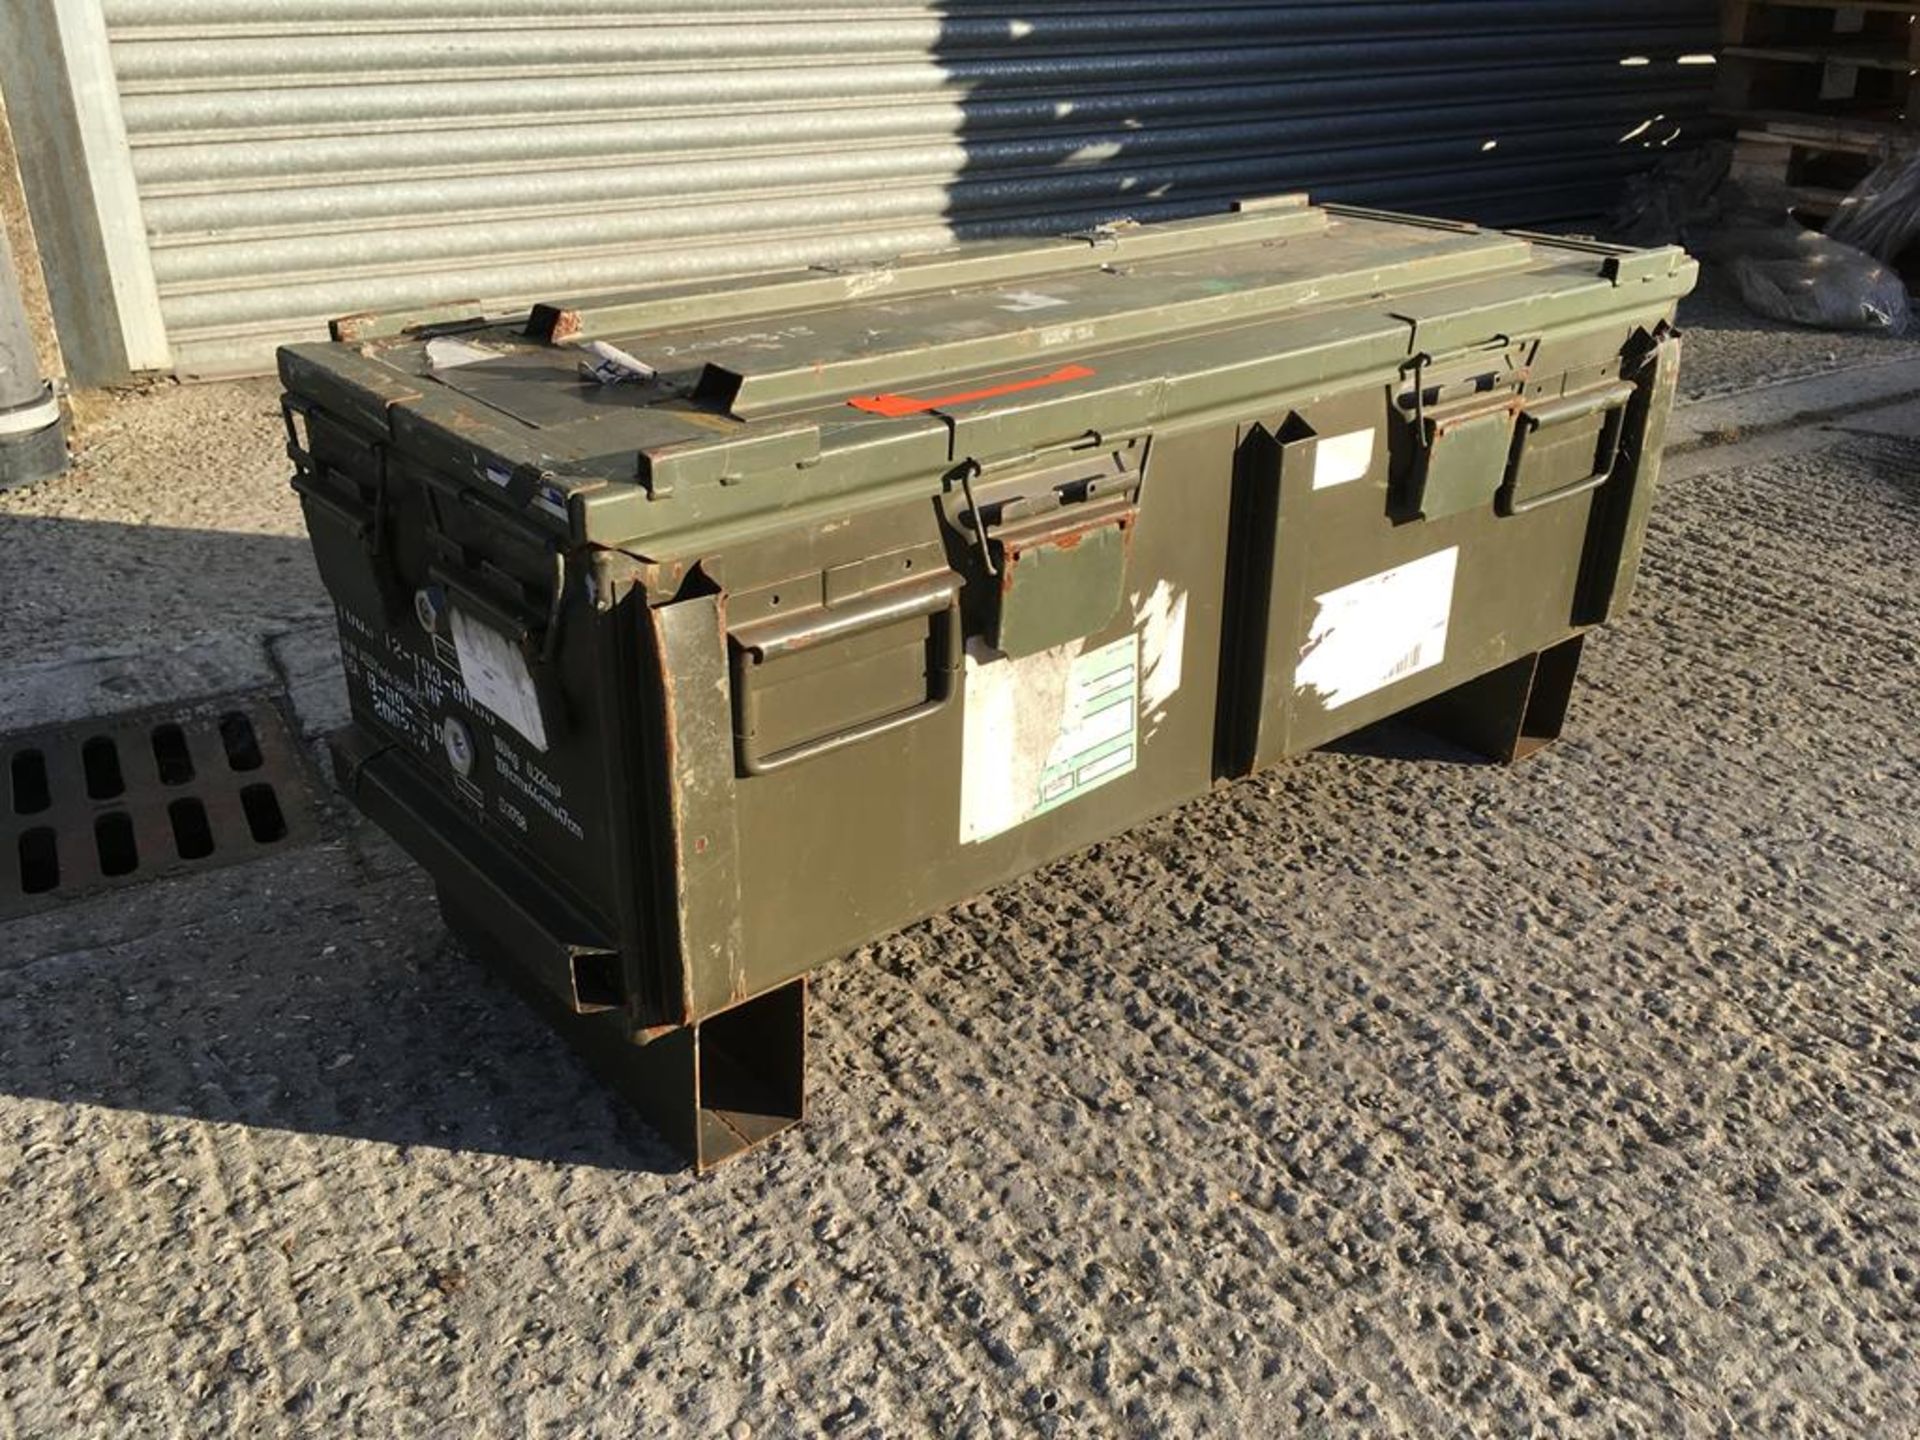 LARGE EX NATO AMMUNITION CASE WITH LIFT OUT INTERNAL FRAME